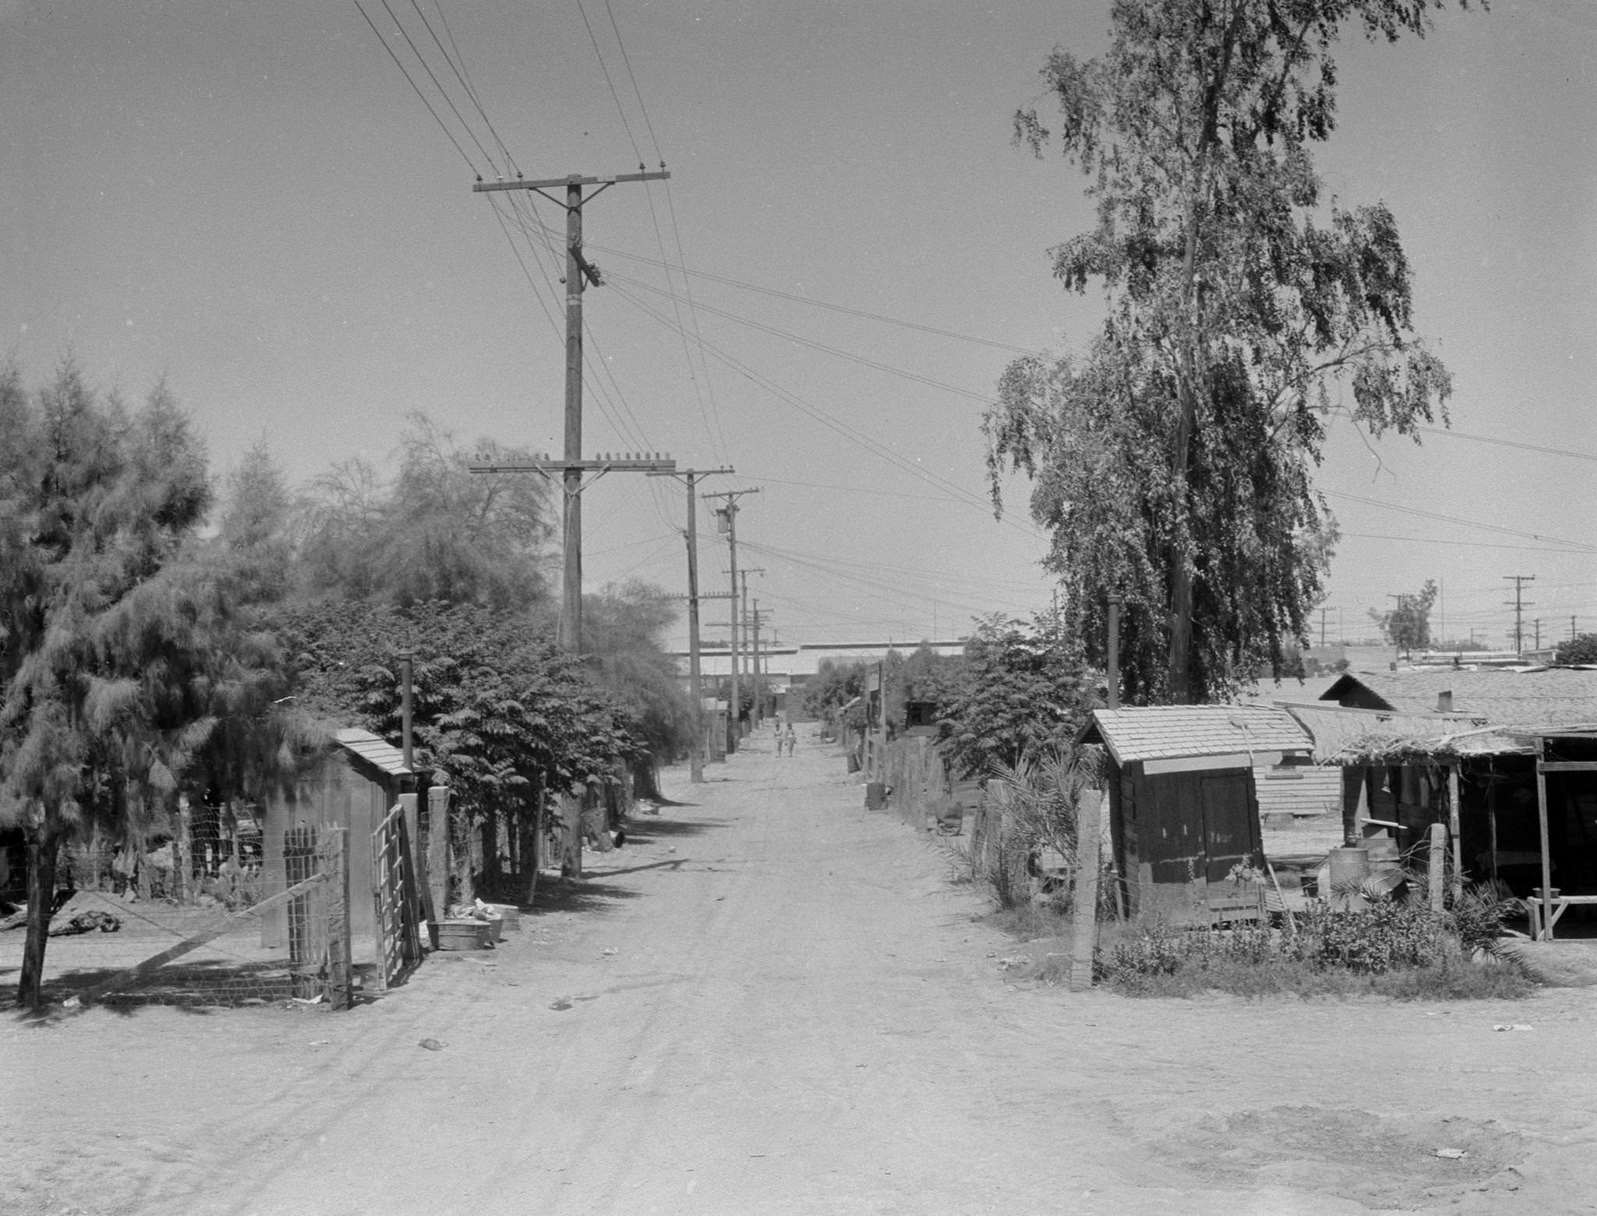 Mexican field workers' homes, 1930s